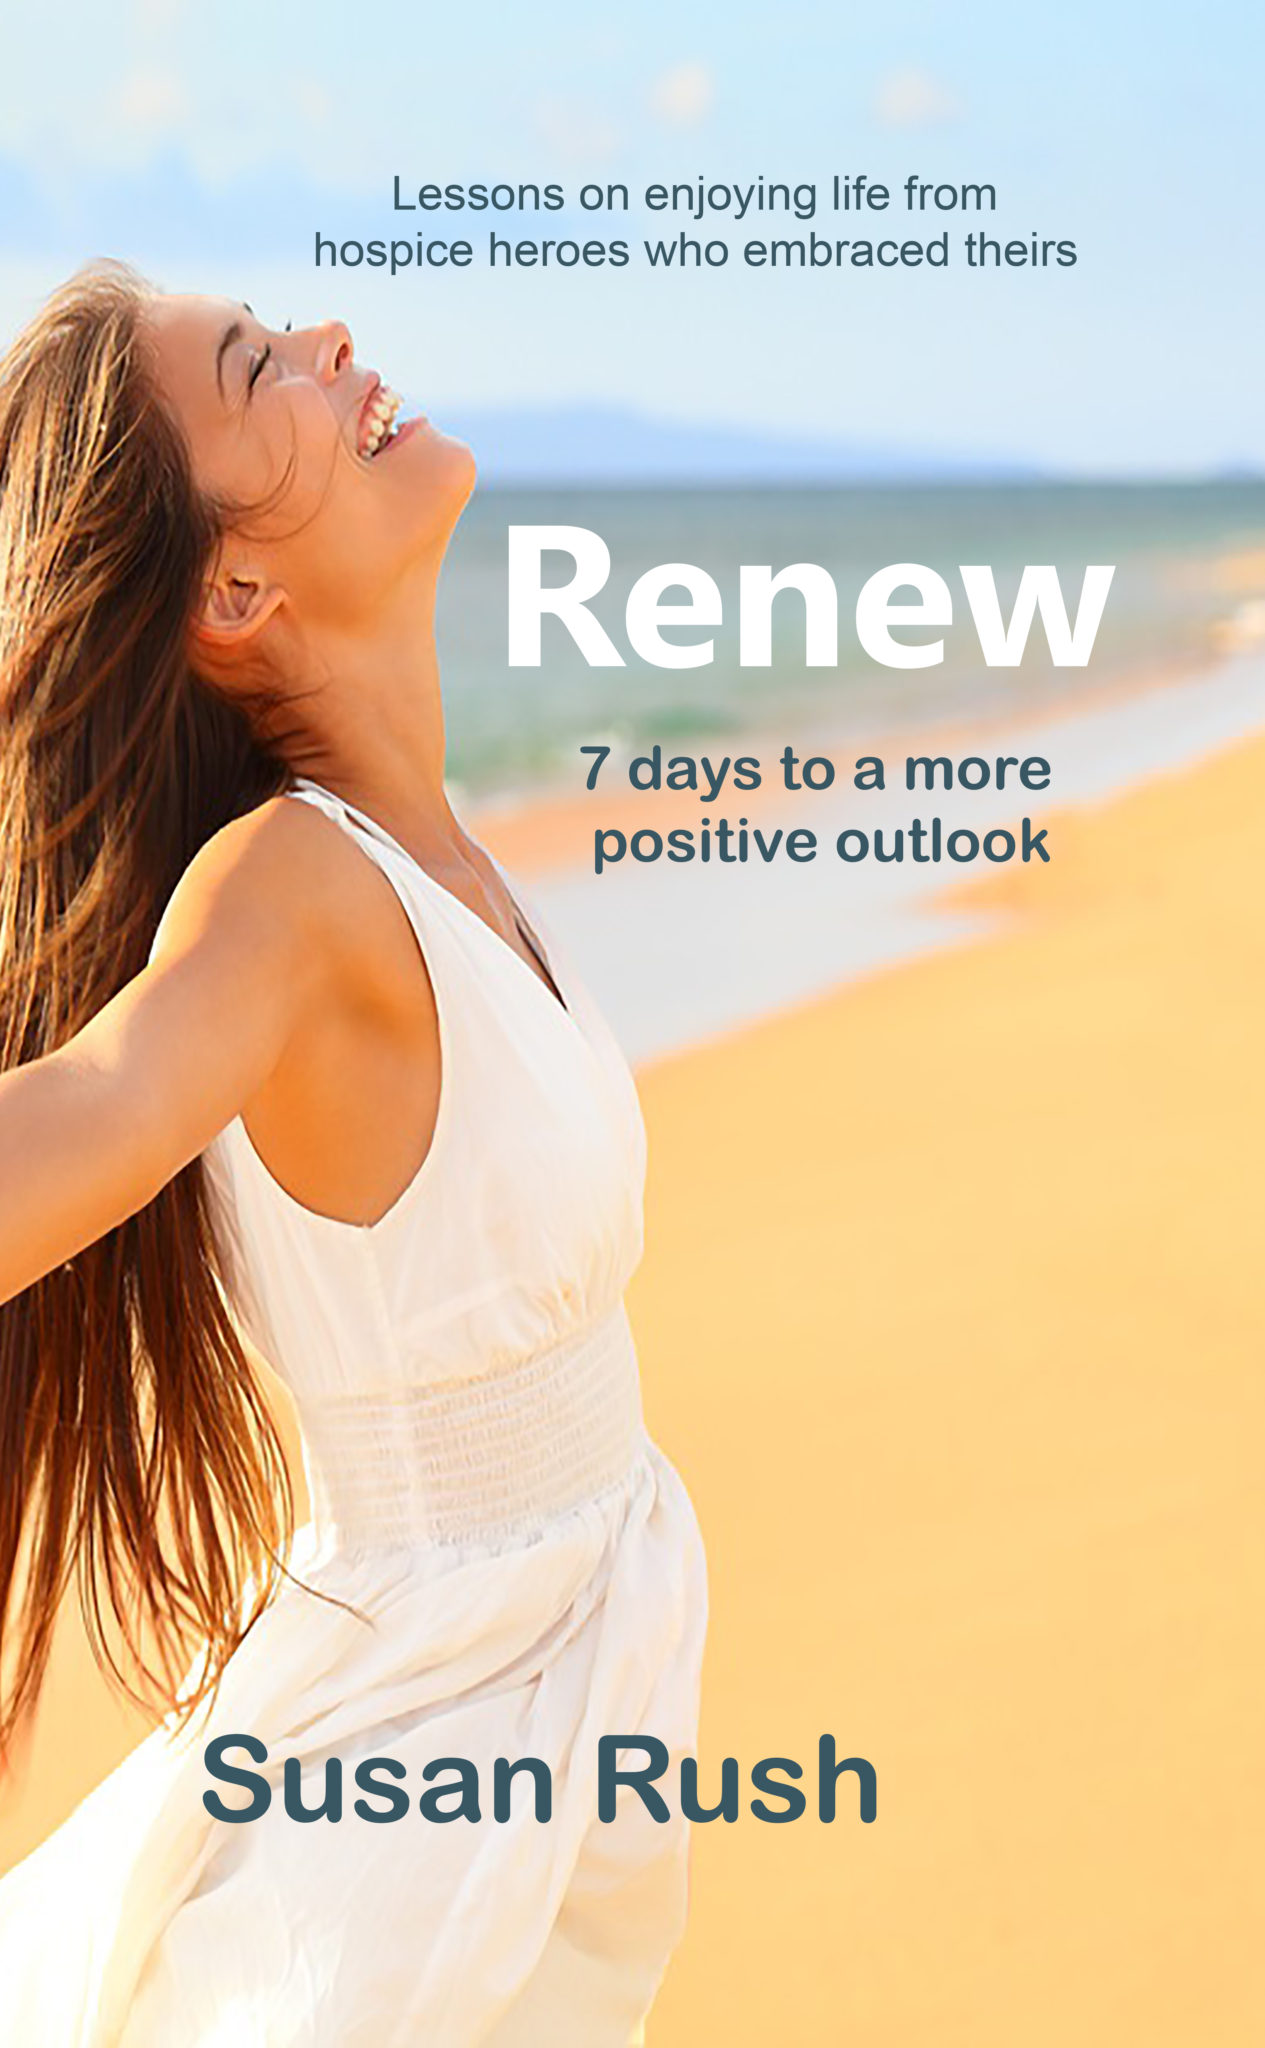 FREE: Renew: 7 days to a more positive outlook by Susan Rush